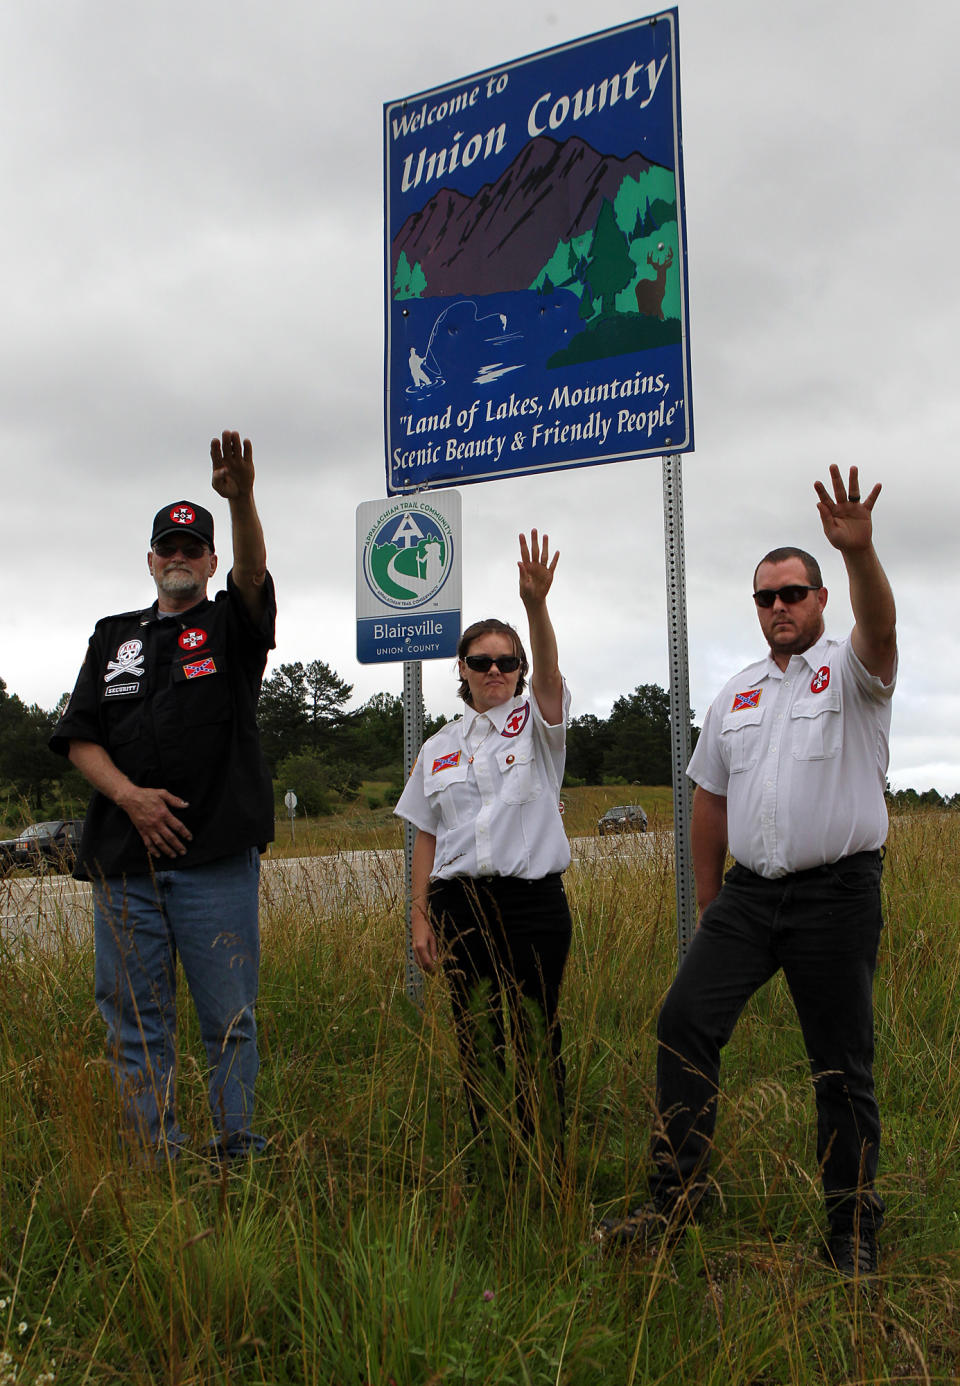 From left, Knighthawk, April Hanson and her husband Harley Hanson, members of the International Keystone Knights Realm of Georgia, perform a traditional Klan salute along the portion of highway they want to adopt allowing them to put up a sign and do litter removal near Blairsville, Ga., Sunday, June 10, 2012. The Ku Klux Klan group wants to join Georgia's "Adopt-A-Highway" program for litter removal, which could force state officials to make difficult decisions on the application. (AP Photo/The Atlanta Journal-Constitution, Curtis Compton)